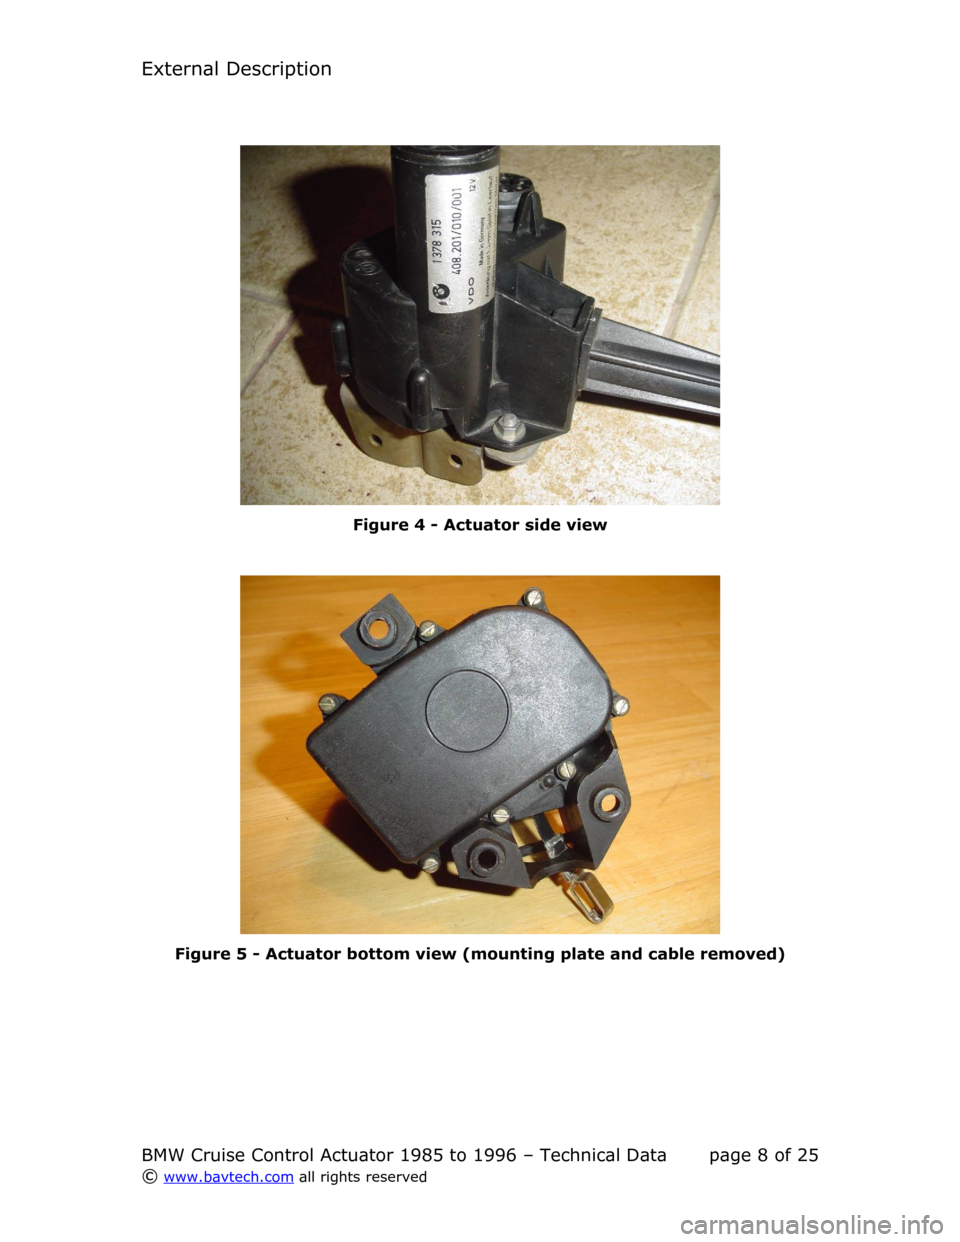 BMW 7 SERIES 1992 E32 Cruise Control Acutator External Description
Figure  4  - Actuator side view
Figure  5  - Actuator bottom view (mounting plate and cable removed)
BMW Cruise Control Actuator 1985 to 1996 – Technical Data page  8  of  25
©